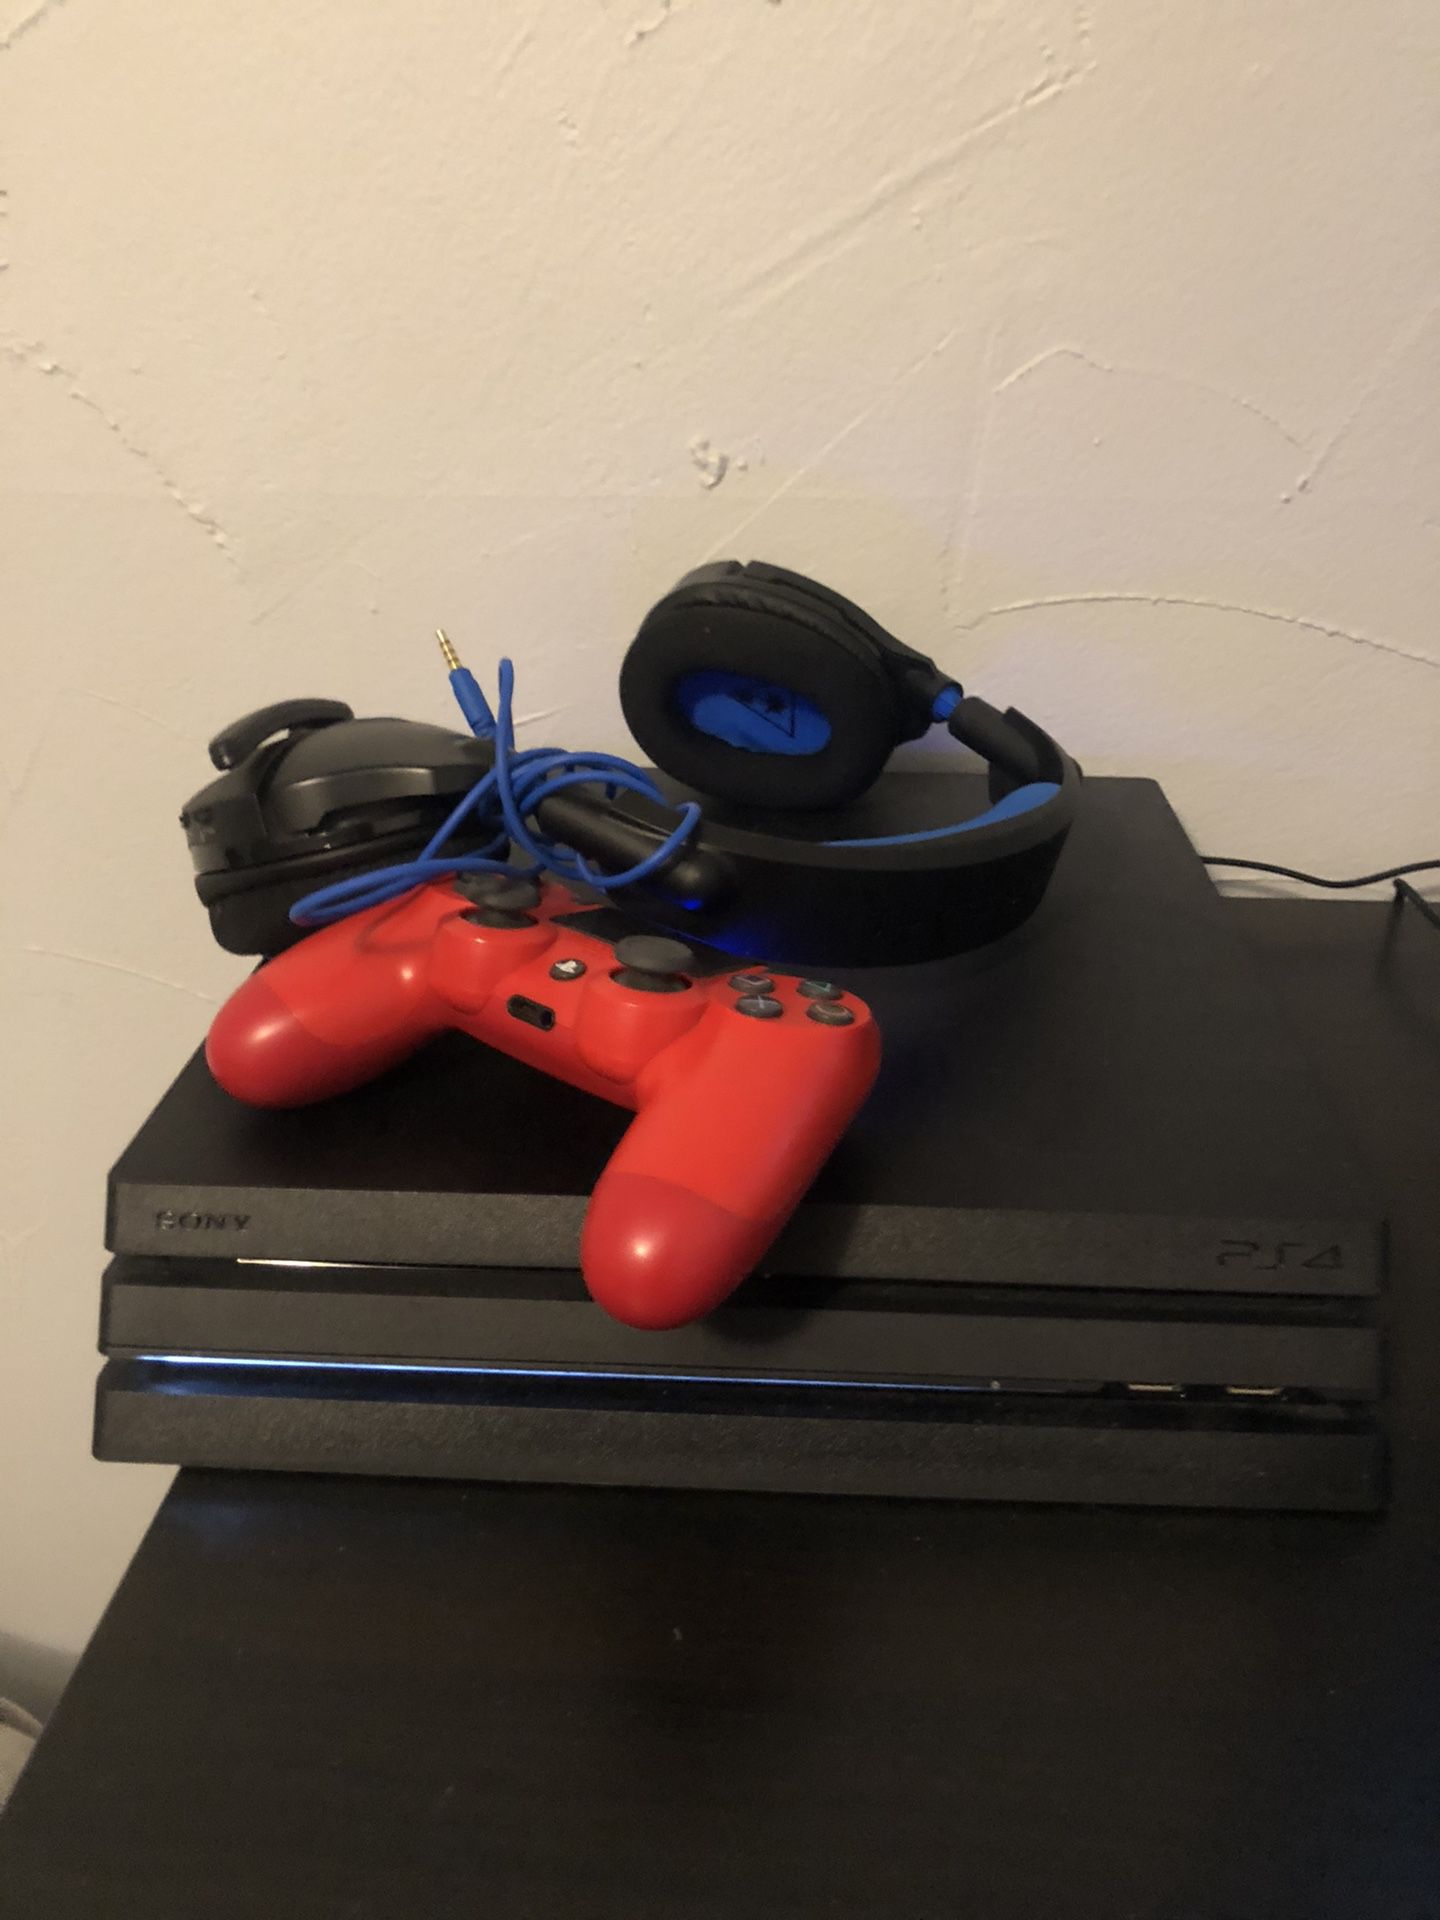 Ps4 pro with Multiple games, red controller and Turtle beach headset